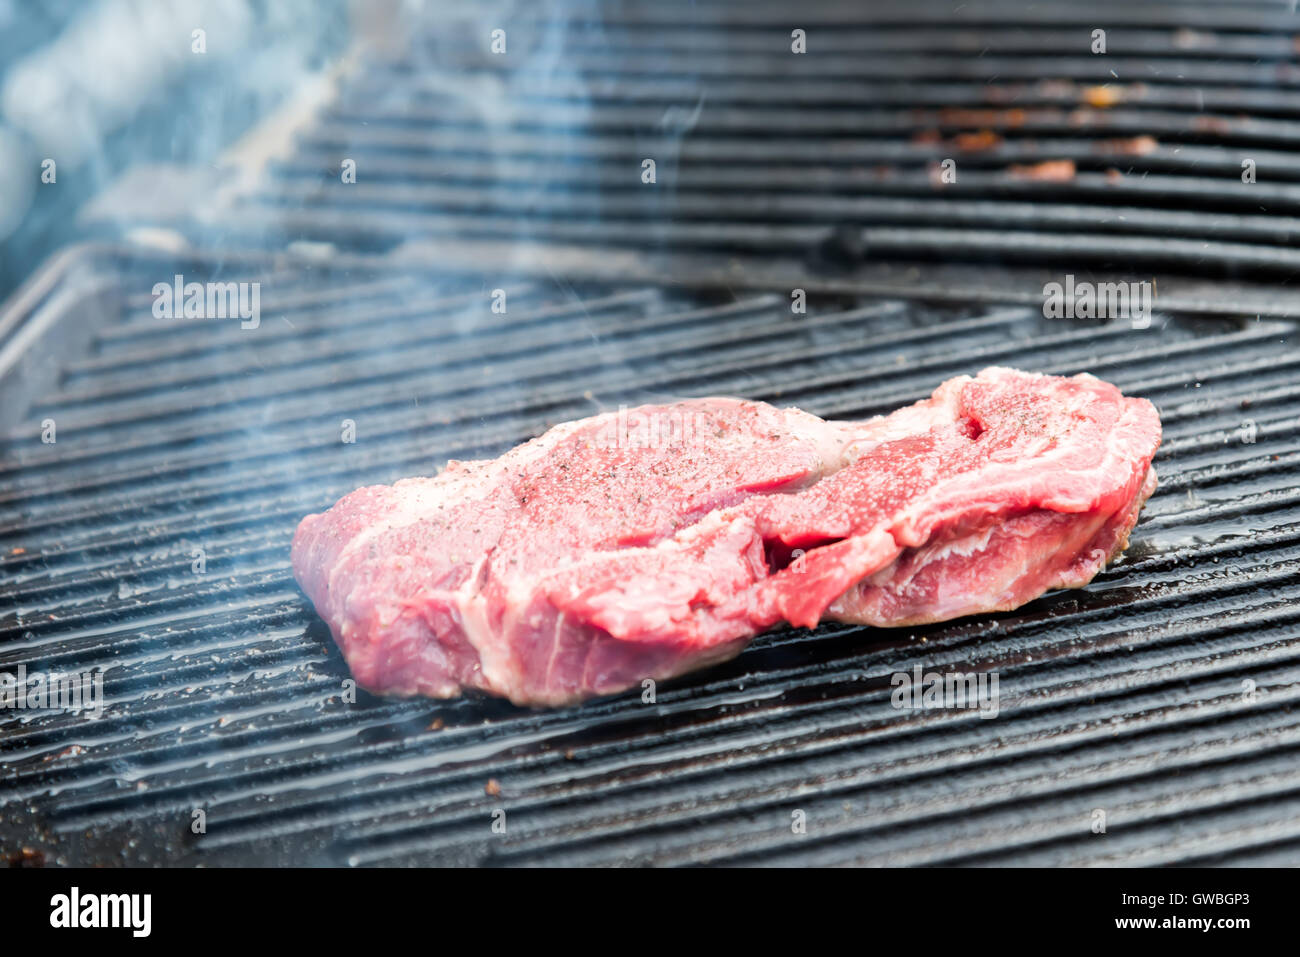 Metal Grill Stock Photo, Picture and Royalty Free Image. Image